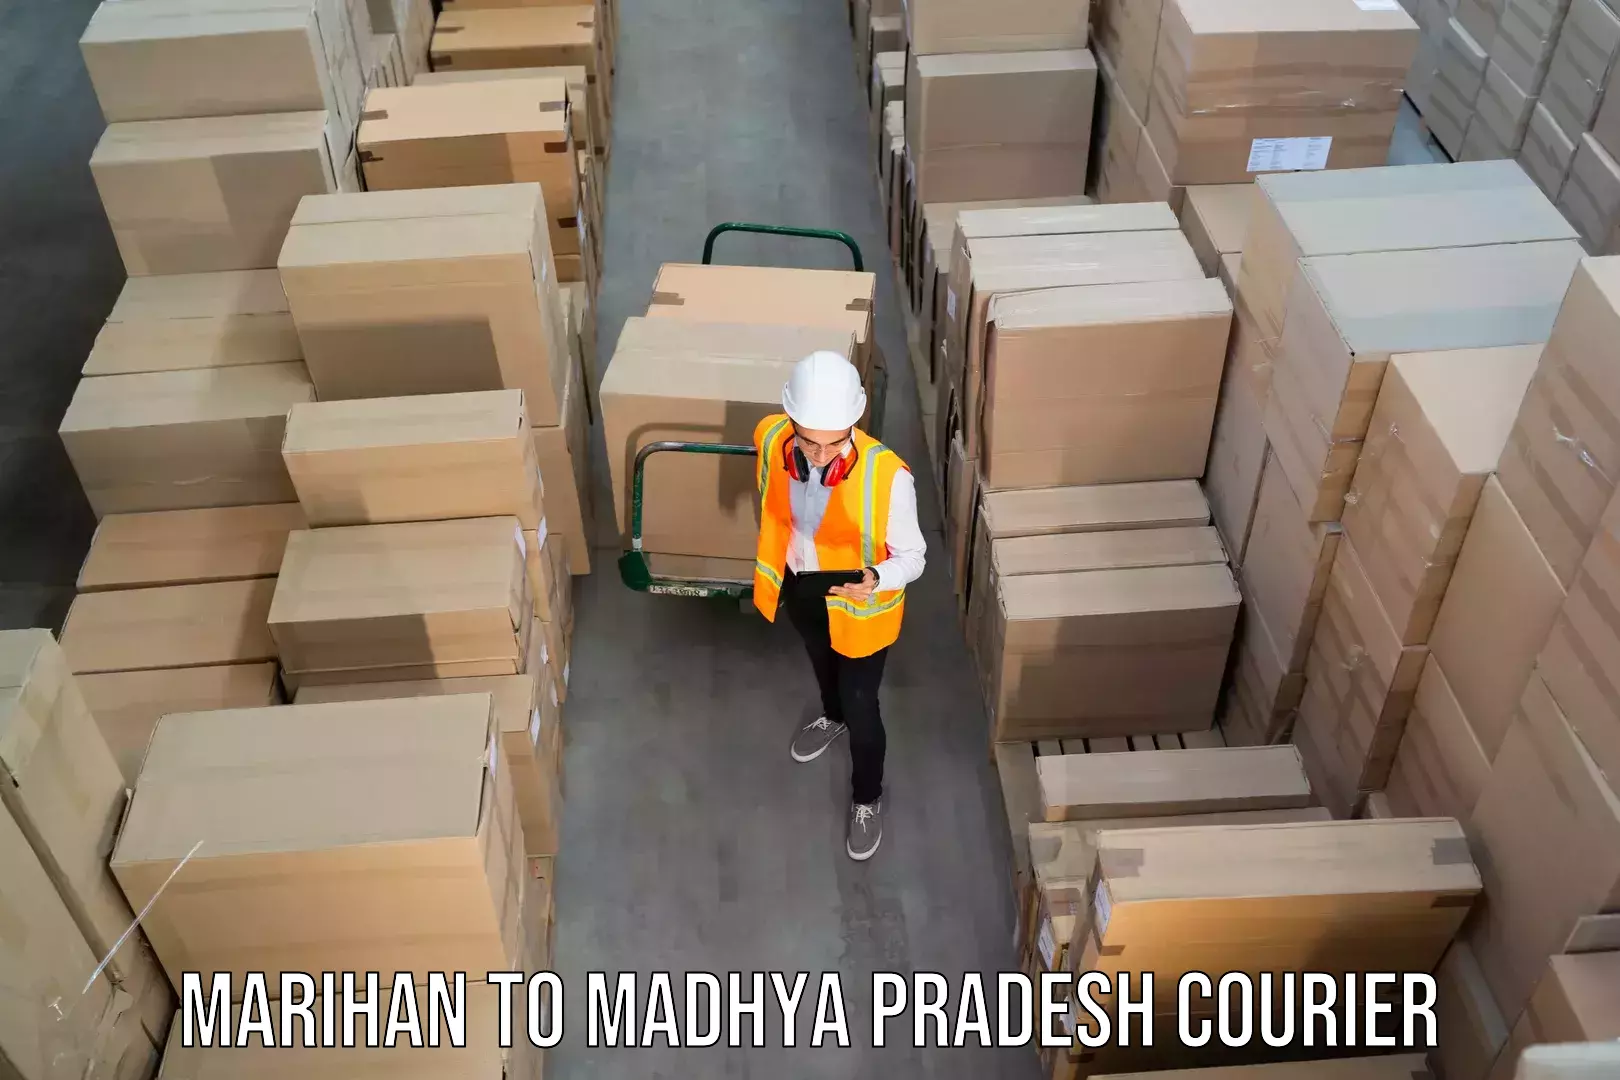 Premium delivery services Marihan to Jhunku